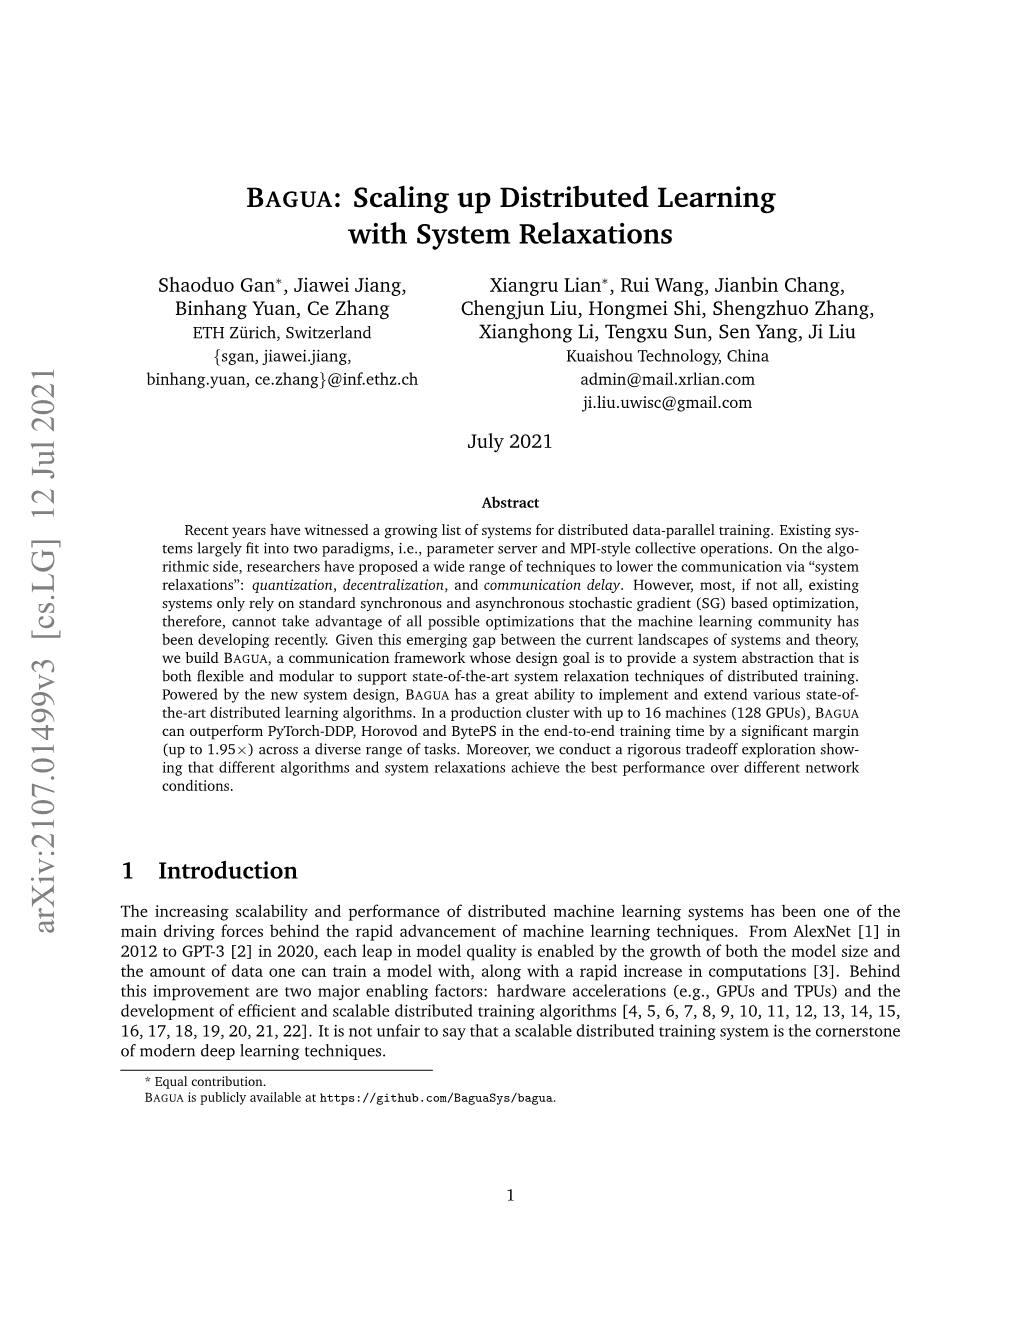 BAGUA: Scaling up Distributed Learning with System Relaxations